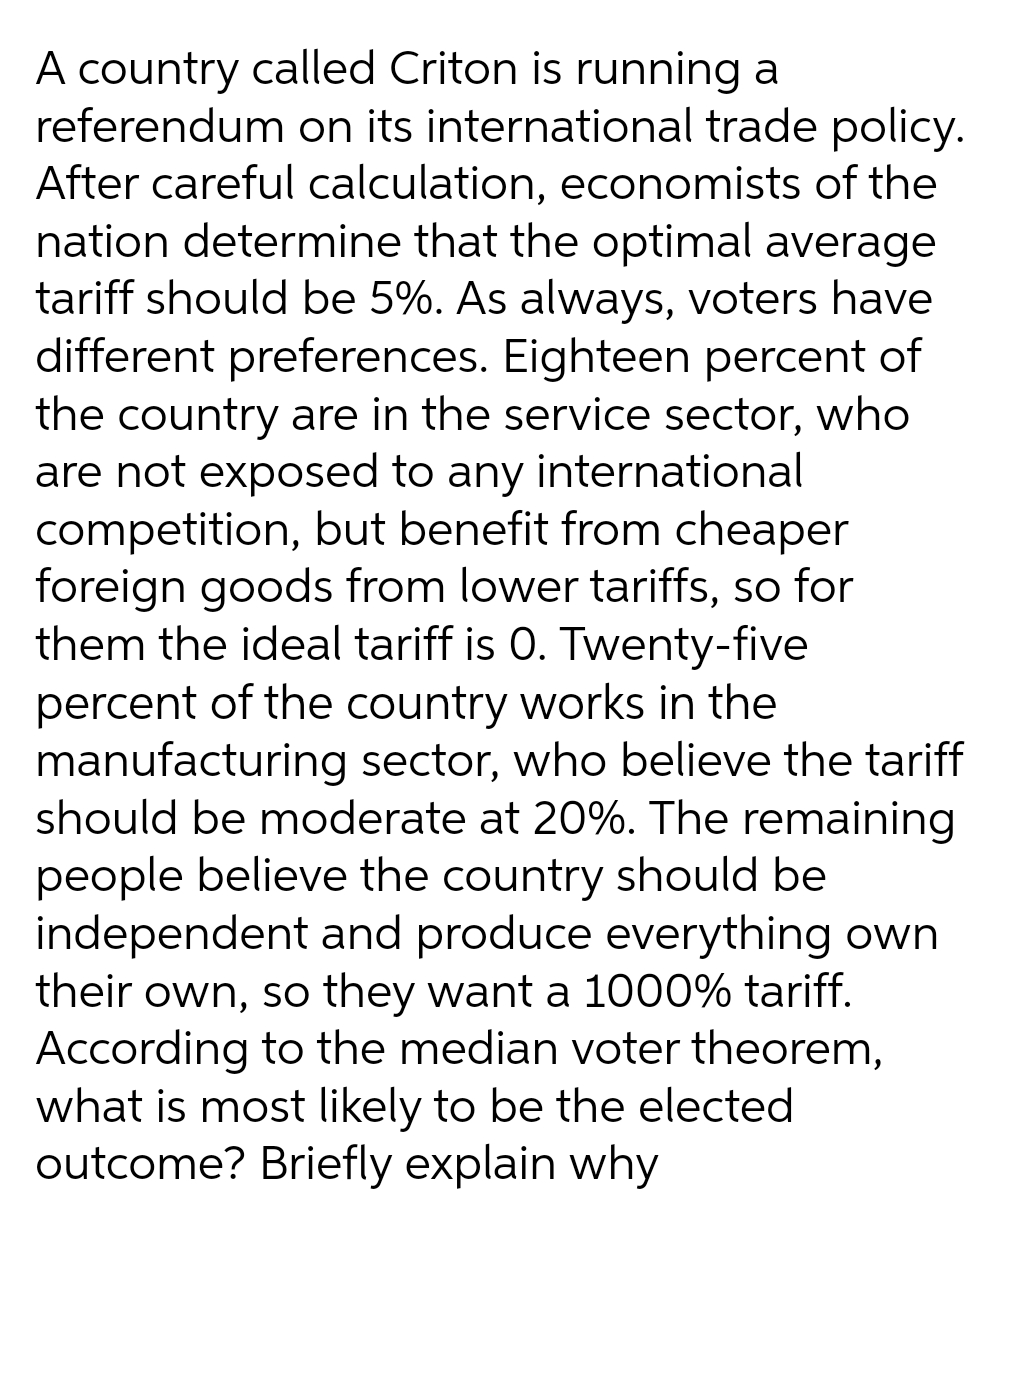 A country called Criton is running a
referendum on its international trade policy.
After careful calculation, economists of the
nation determine that the optimal average
tariff should be 5%. As always, voters have
different preferences. Eighteen percent of
the country are in the service sector, who
are not exposed to any international
competition, but benefit from cheaper
foreign goods from lower tariffs, so for
them the ideal tariff is 0. Twenty-five
percent of the country works in the
manufacturing sector, who believe the tariff
should be moderate at 20%. The remaining
people believe the country should be
independent and produce everything own
their own, so they want a 1000% tariff.
According to the median voter theorem,
what is most likely to be the elected
outcome? Briefly explain why
